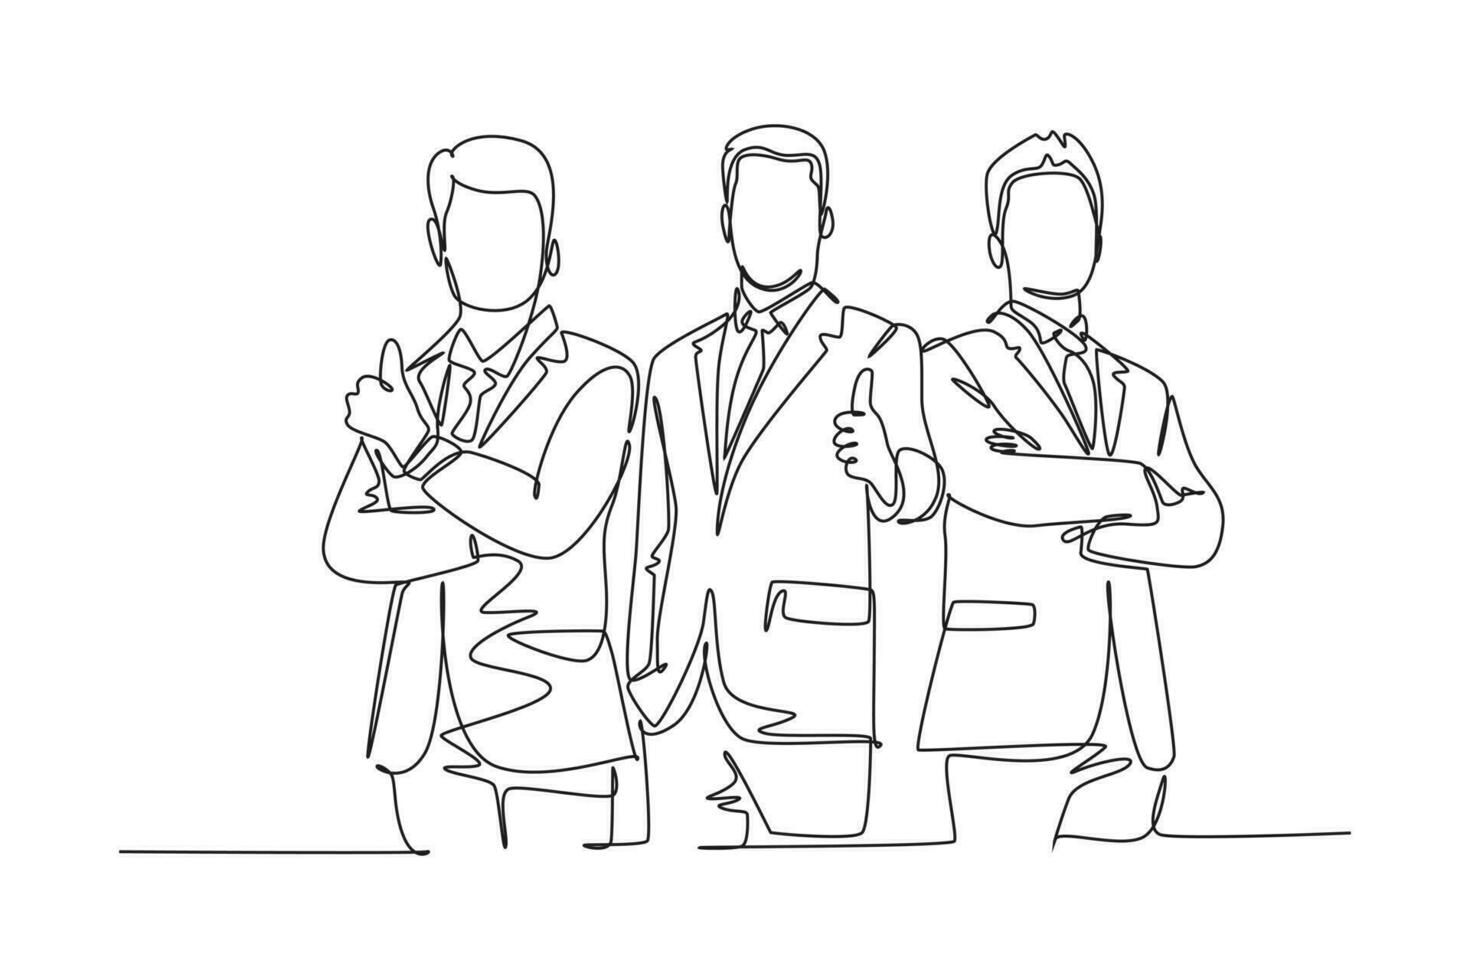 Single one line drawing of young happy businessmen wearing suit giving thumbs up gesture. Business owner dealing with a teamwork concept. Modern continuous line draw design graphic vector illustration